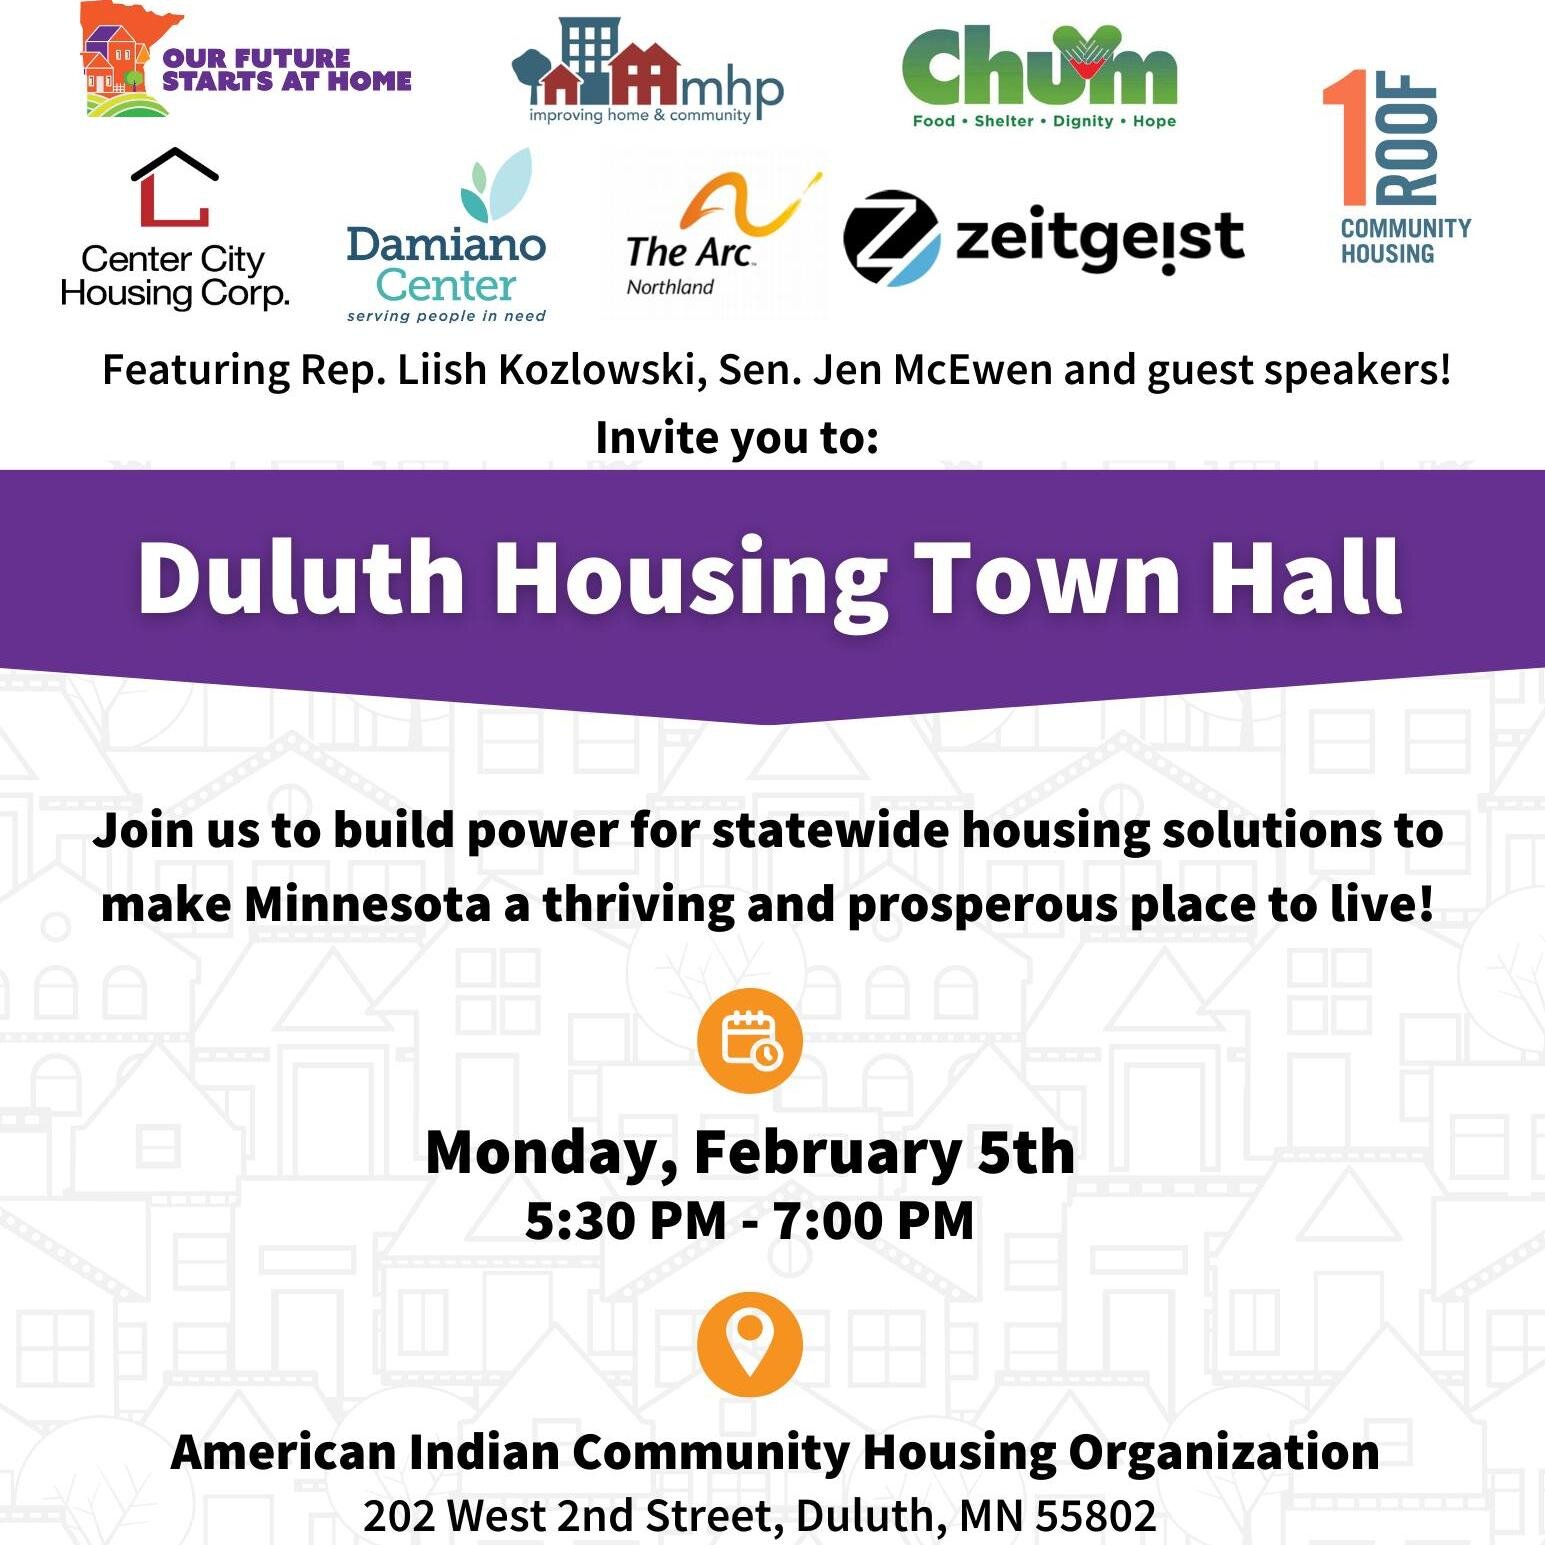 Quick reminder...Come join the conversation! Today at 5:30pm.
#affordablehousing #duluthmn #communityevents 

If you aren't able to attend in person, we will have a stream on our page.